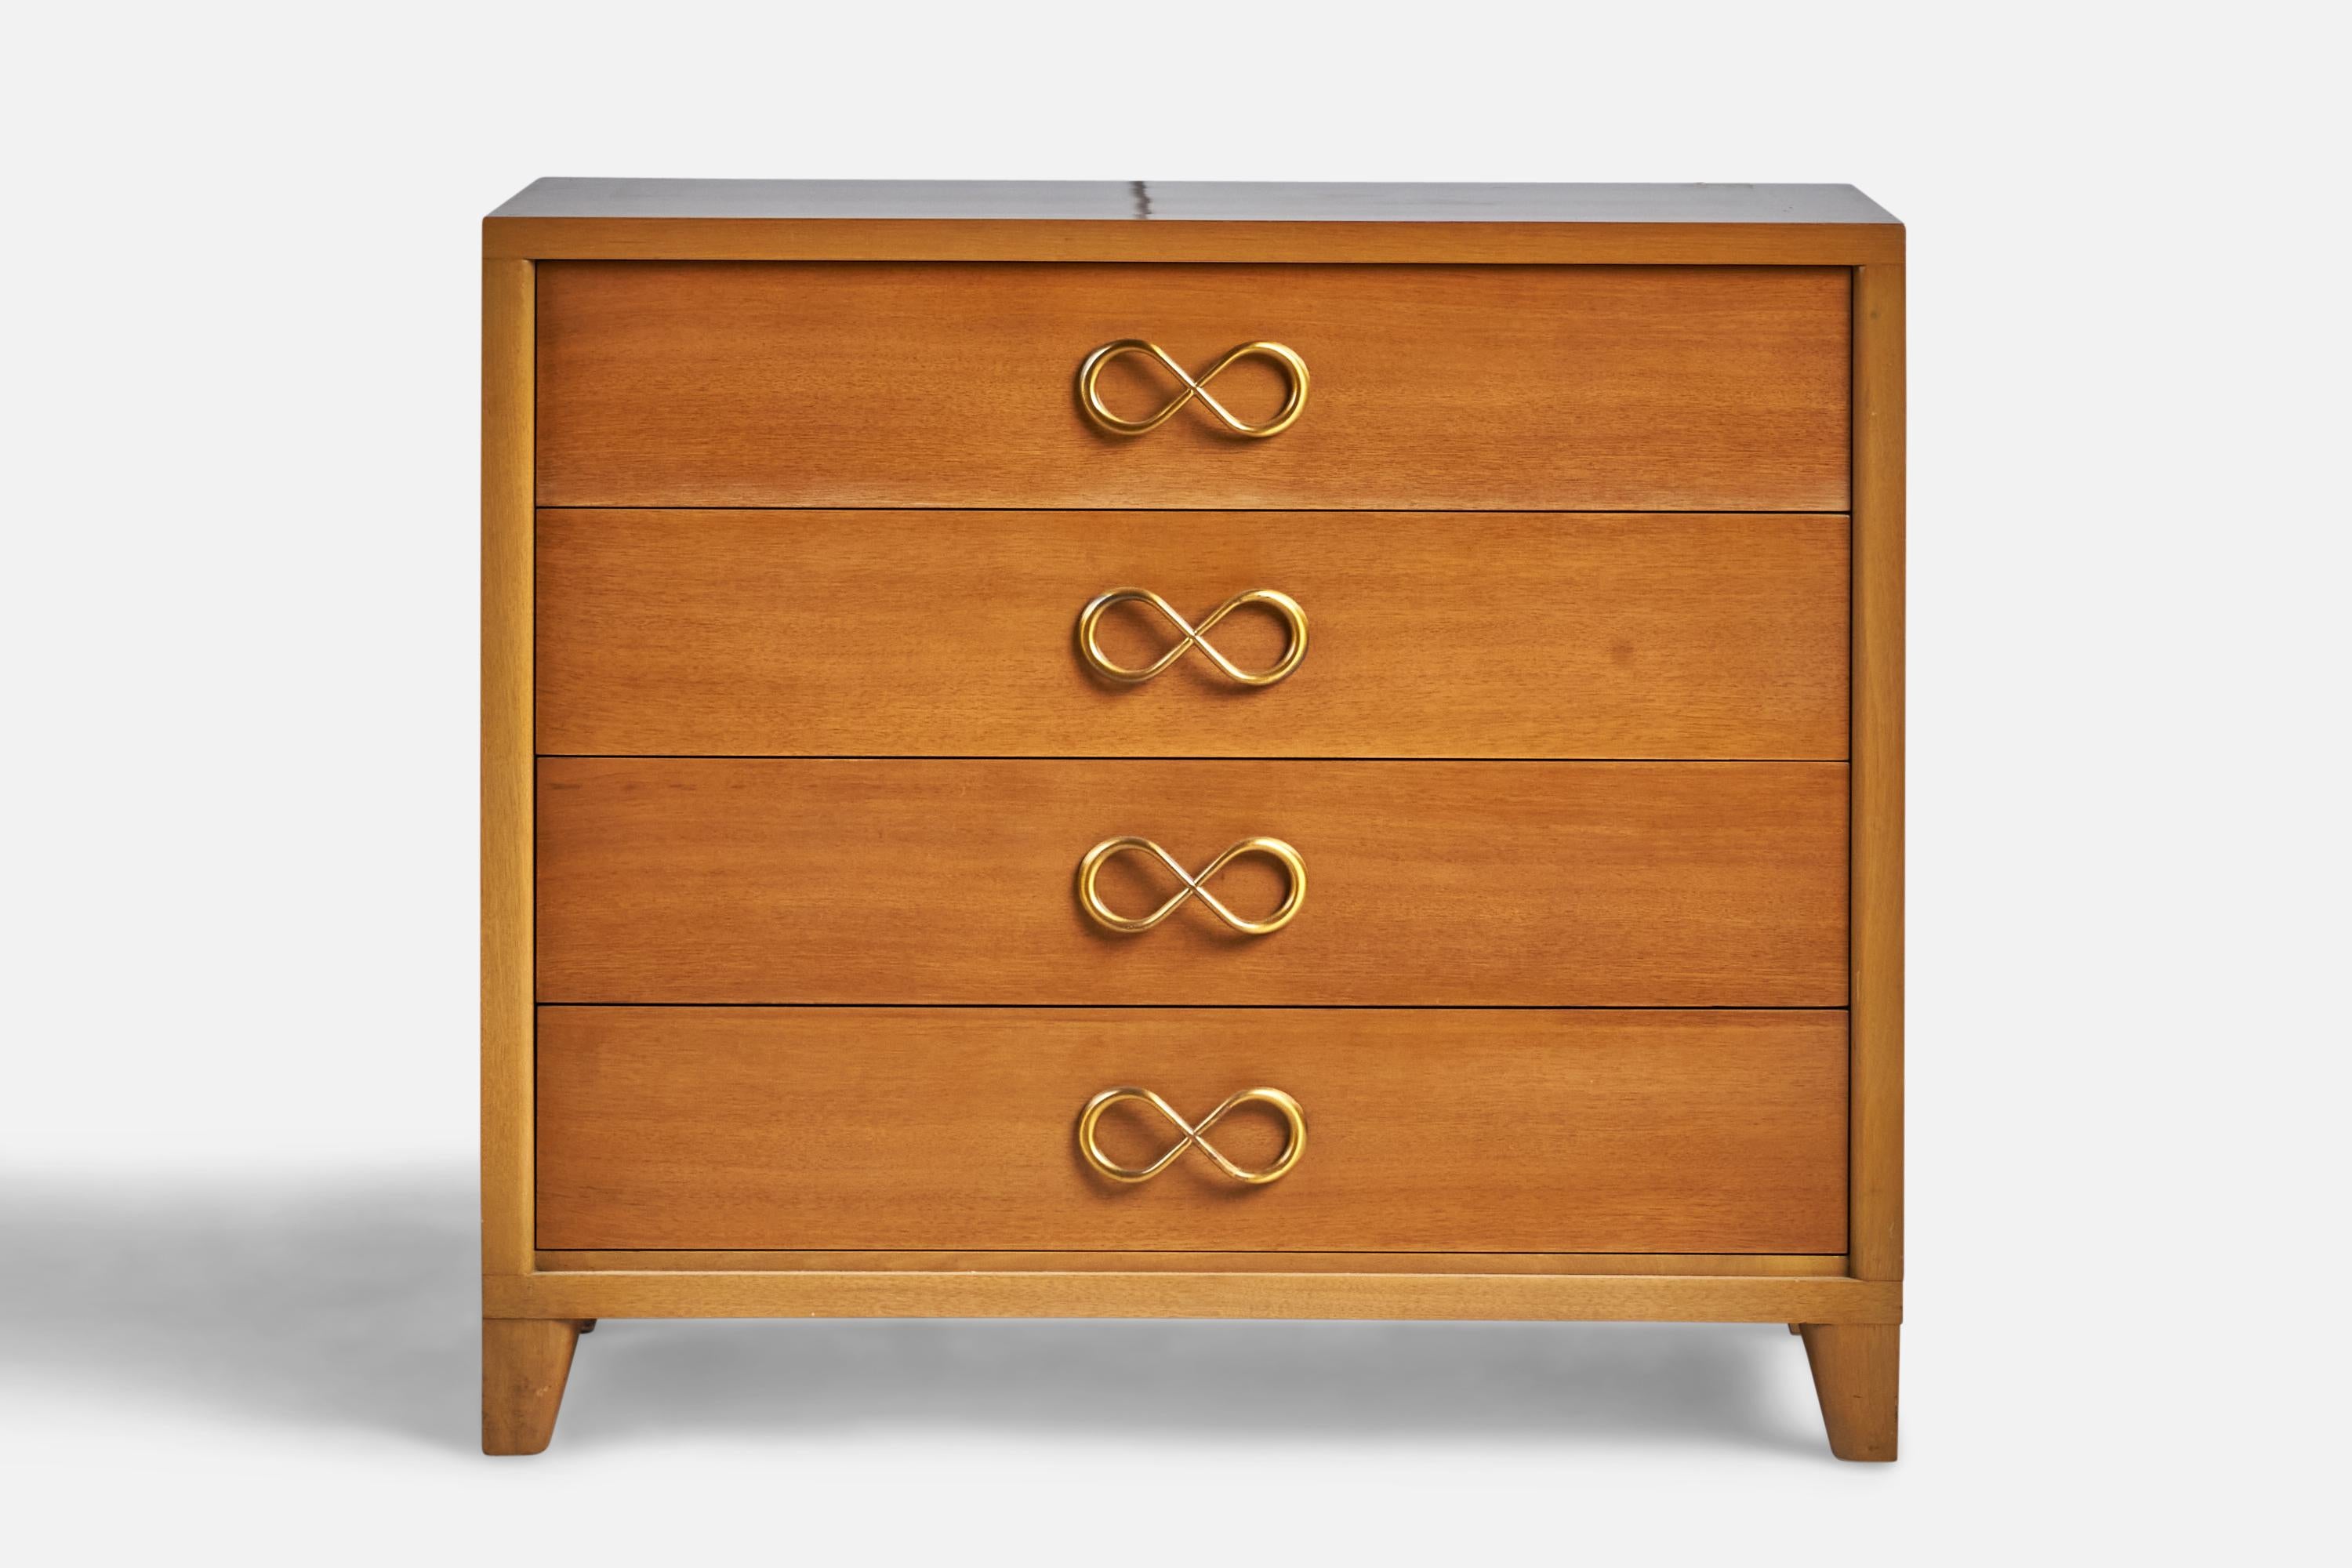 American Red Lion Furniture, Chest of Drawers, Walnut, Brass, USA, 1940s For Sale